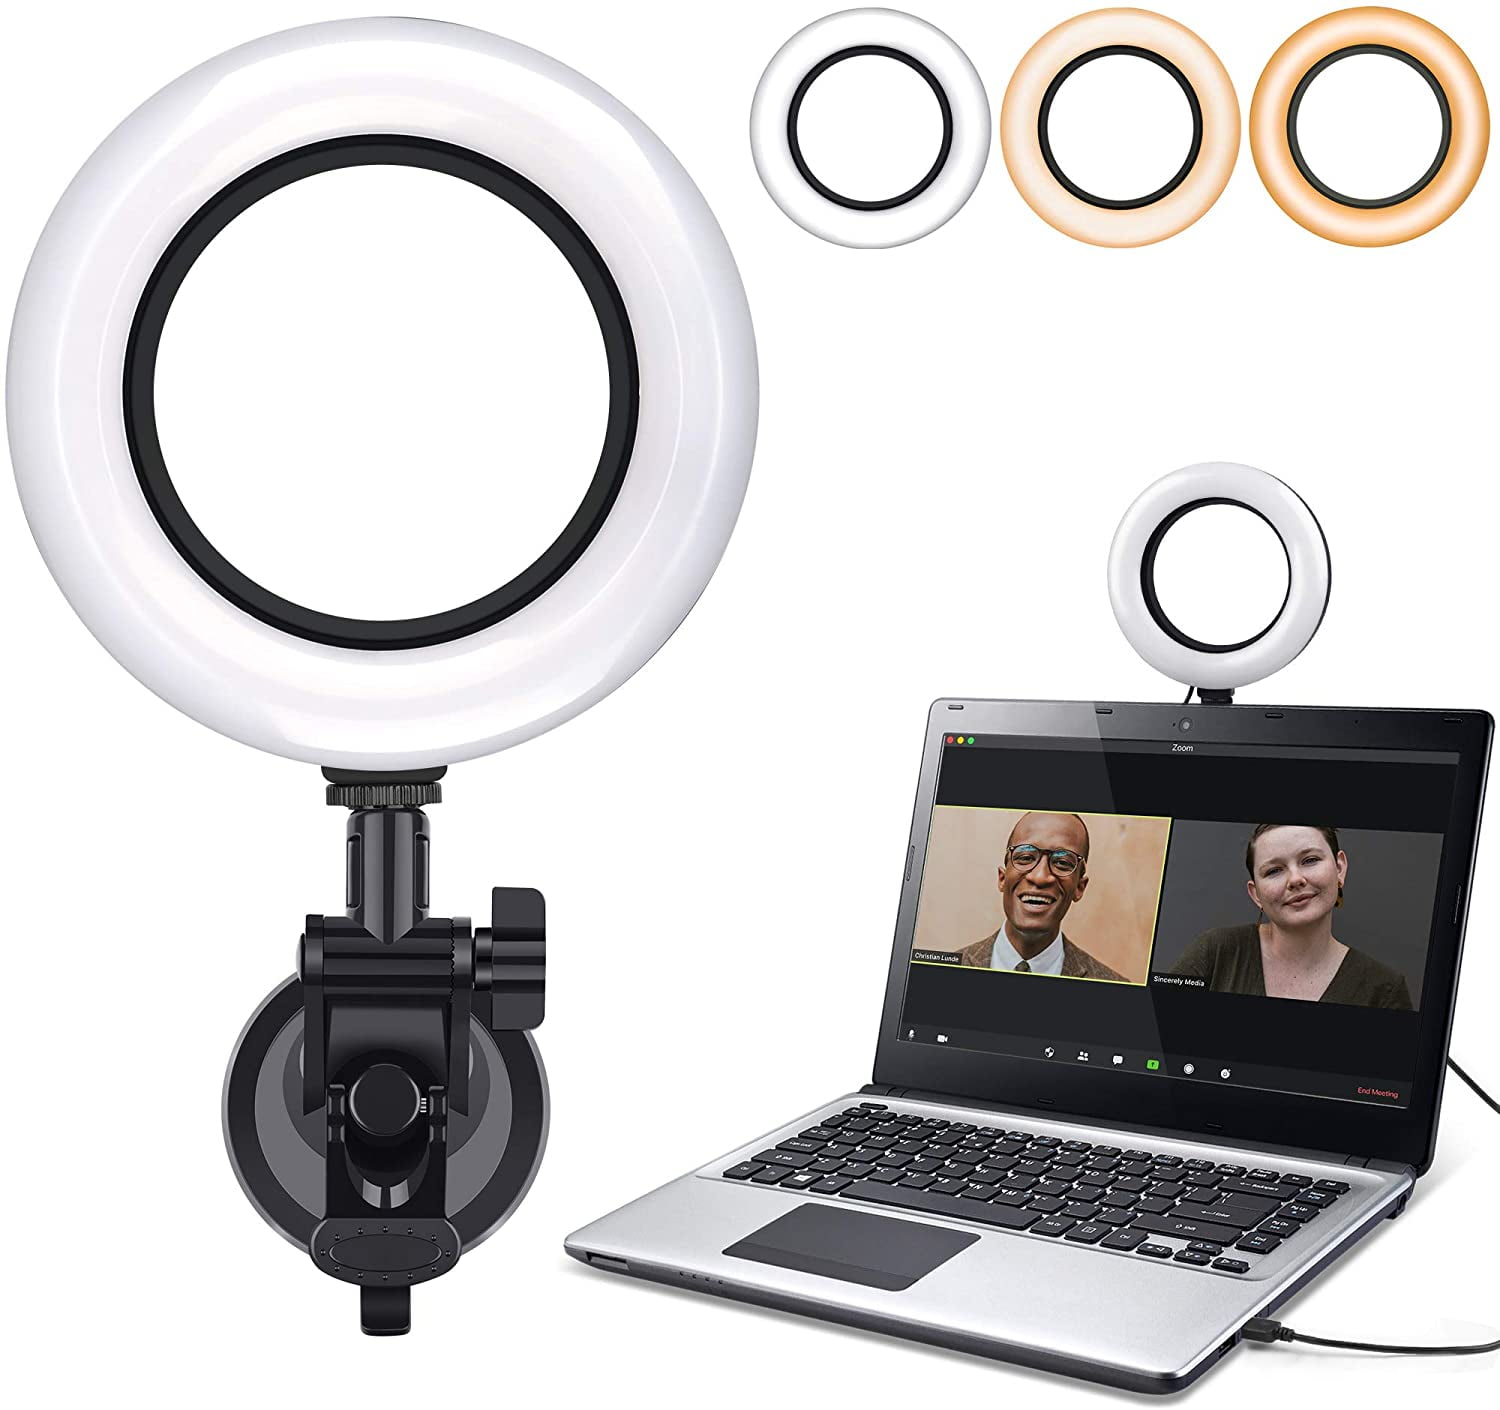 Videos Conference Lighting Zoom Lighting Computer Laptop Lights with Tripod Suction Cup and USB Recharge for Remote Working,Zoom Calls,Live Streaming,Webcast Broadcasting Light for YouTube Vlog 